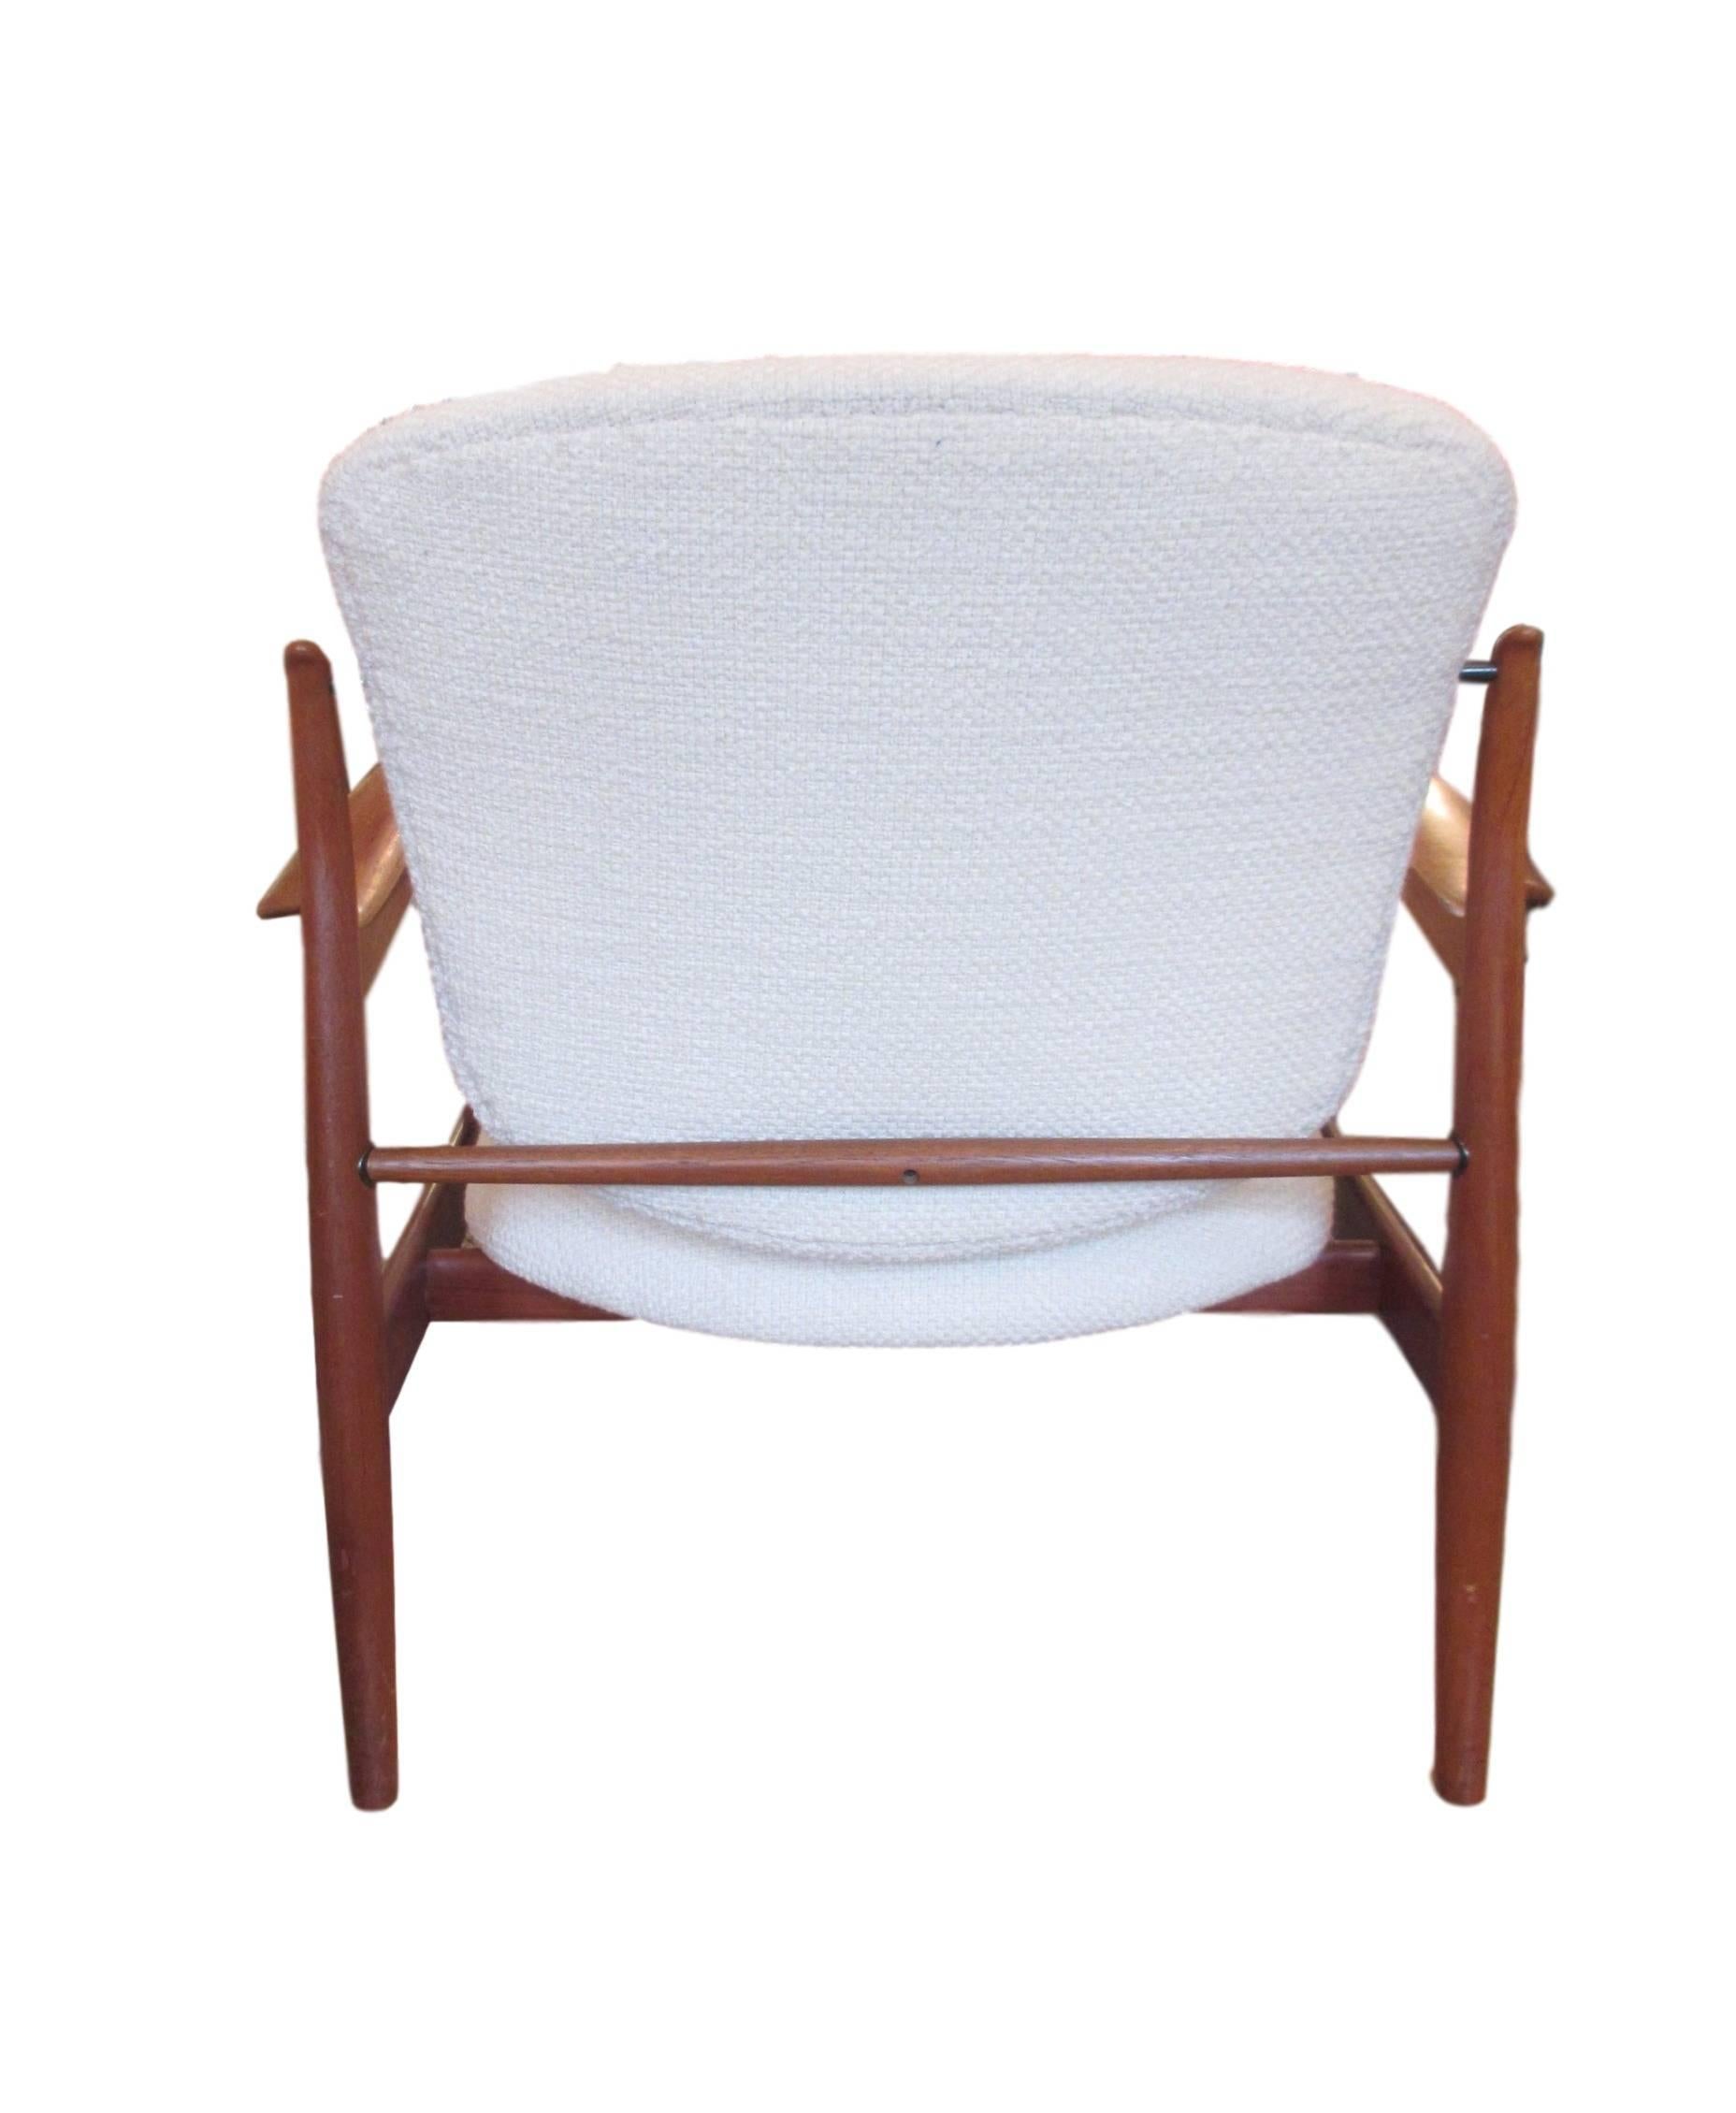 Set of Two Easy FD 136 Chairs by Finn Juhl, Denmark In Excellent Condition For Sale In Brussels, BE